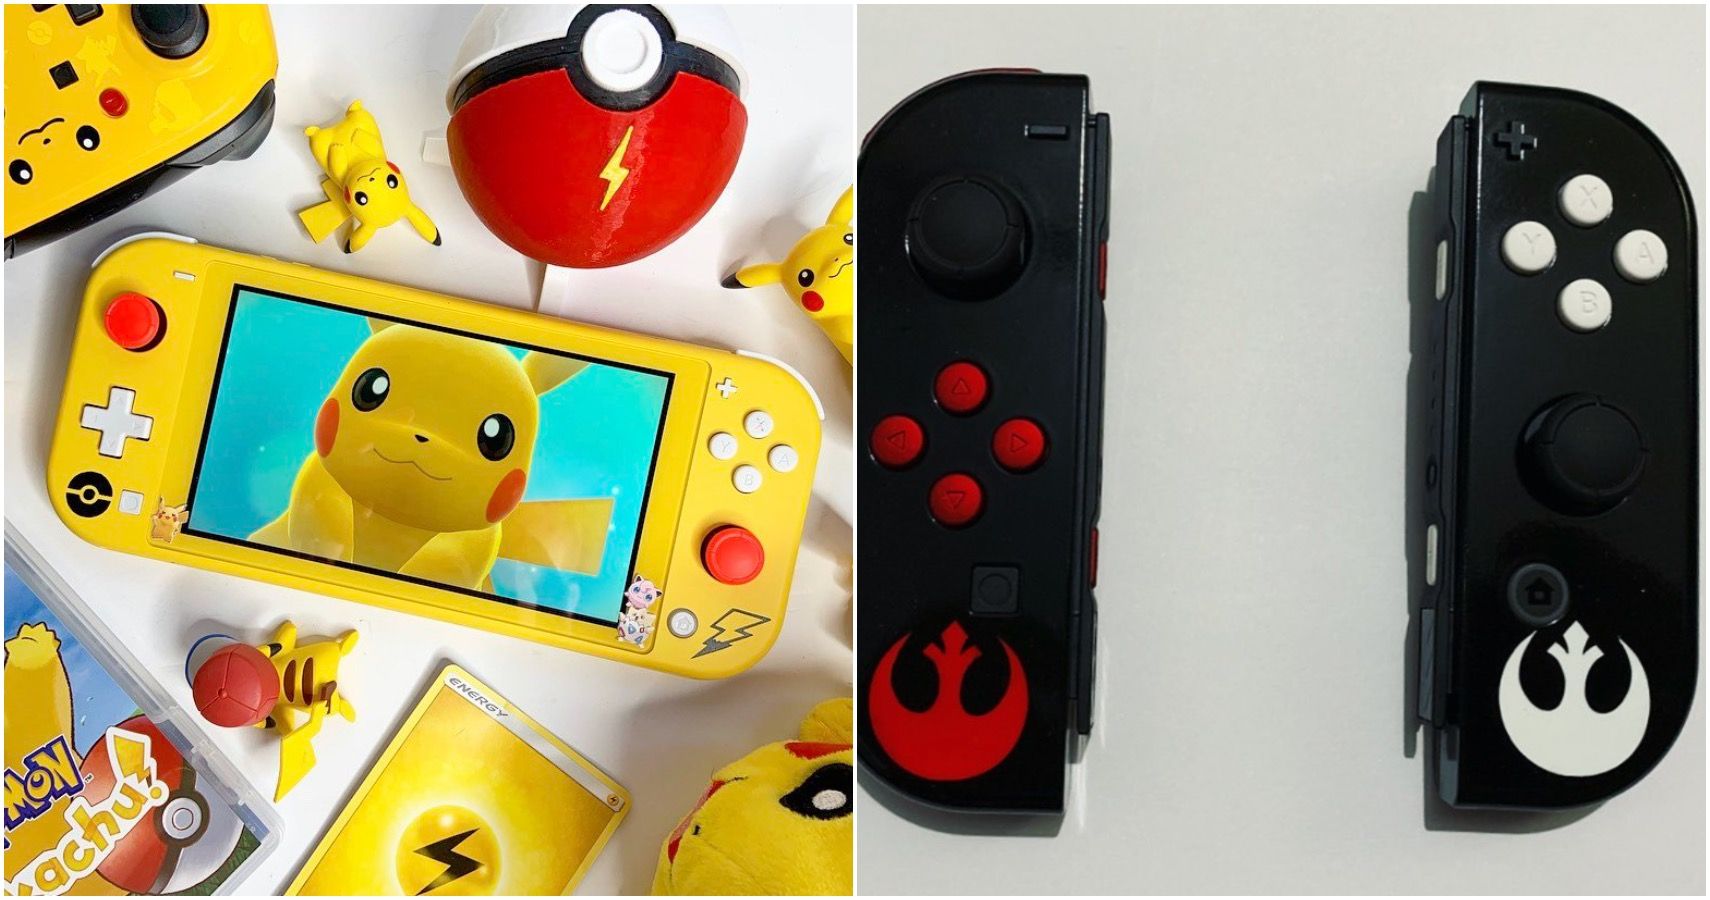 A Switch with a Pikachu skin and joy cons with the Rebel logo